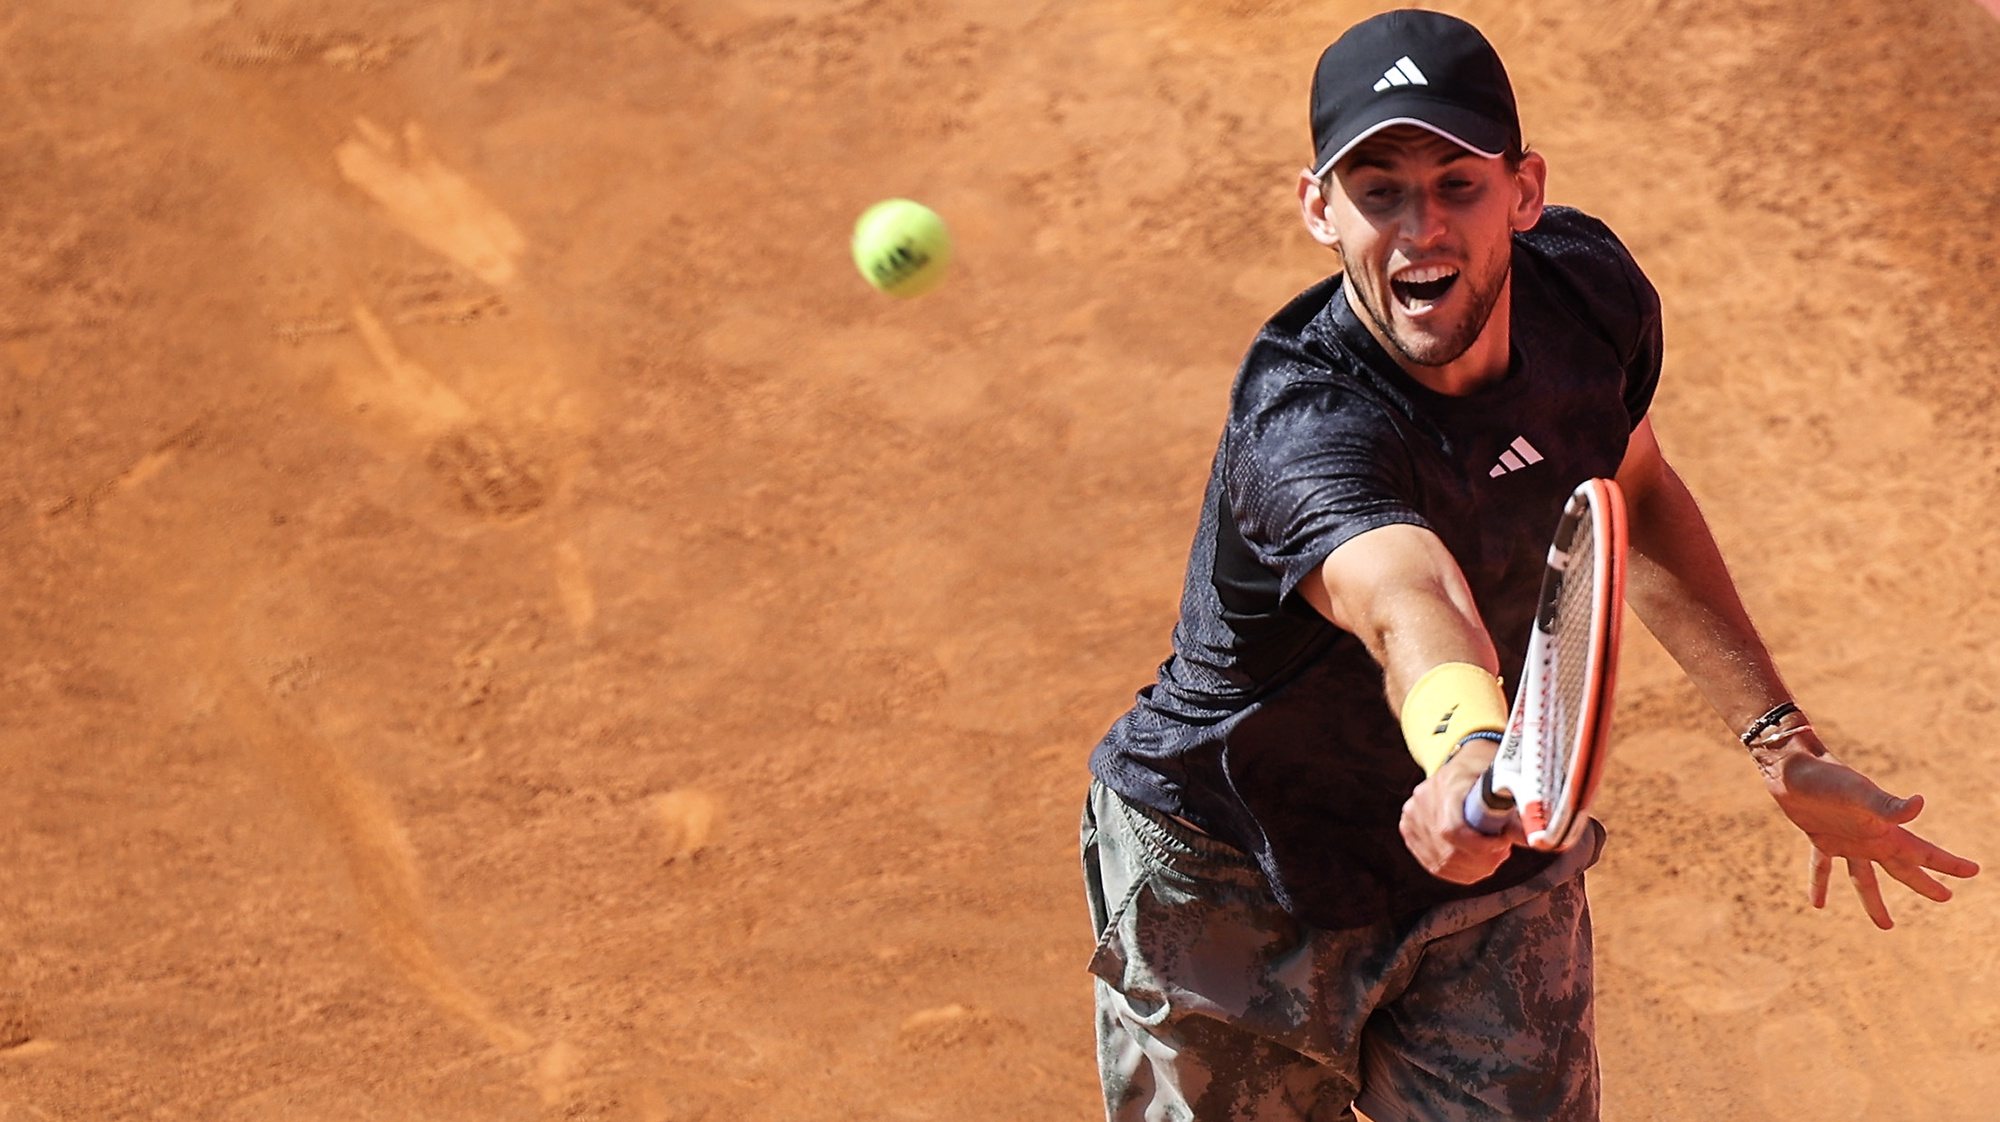 Dominic Thiem from Austria in action against Sebastian Ofner from Austria in the Round of 32 at the Estoril Open tennis tournament in Estoril, Portugal, 04 April 2023. MIGUEL A. LOPES/LUSA